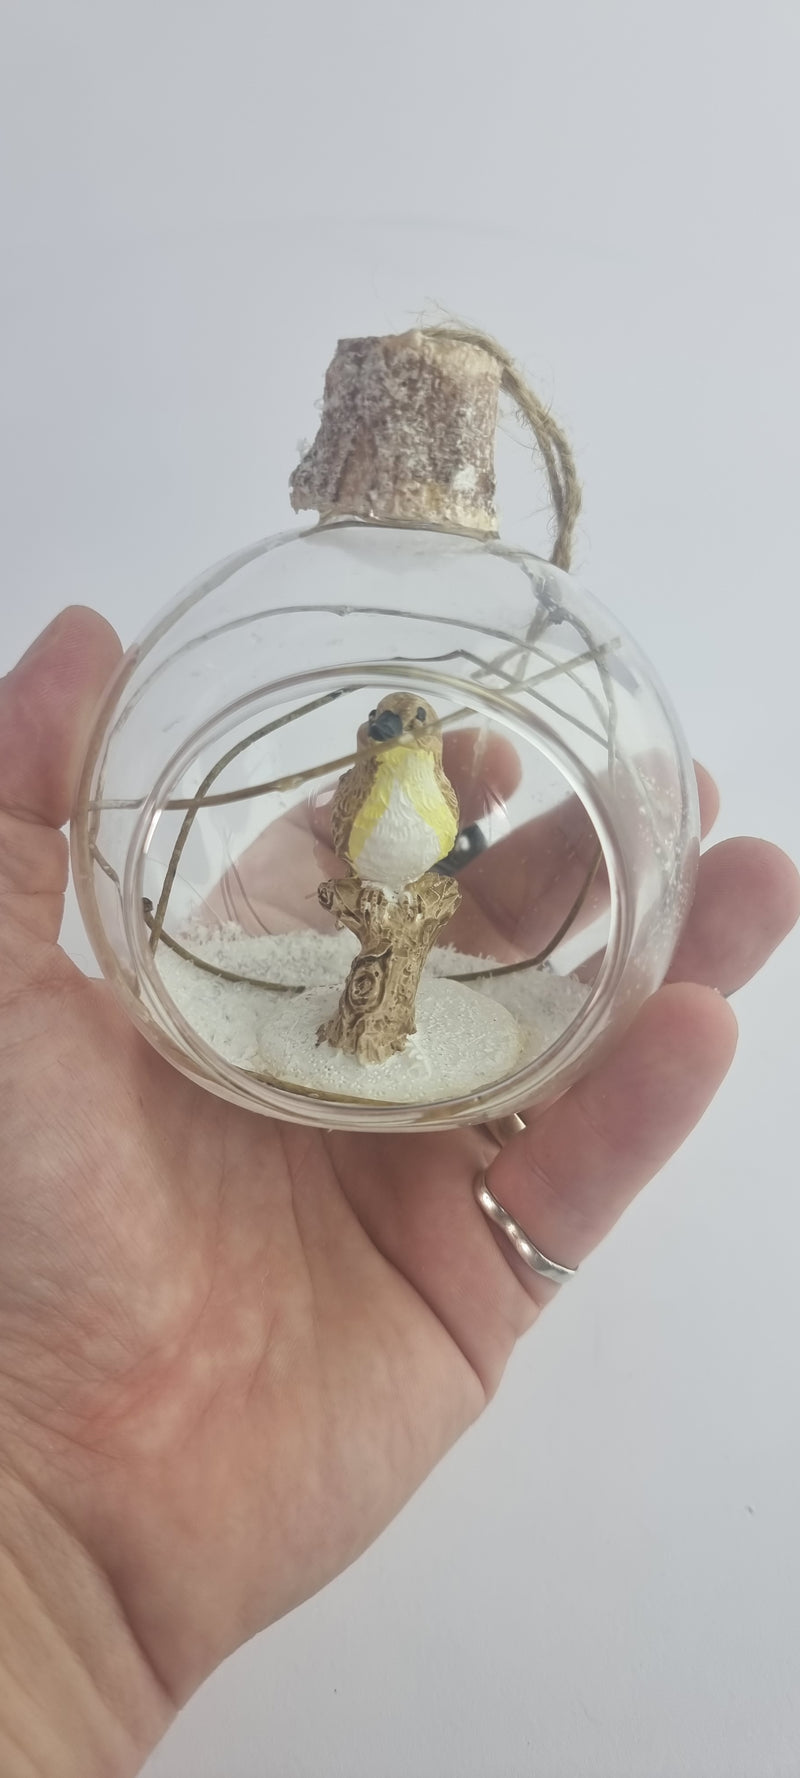 Glass Christmas Bauble with Bird Inside